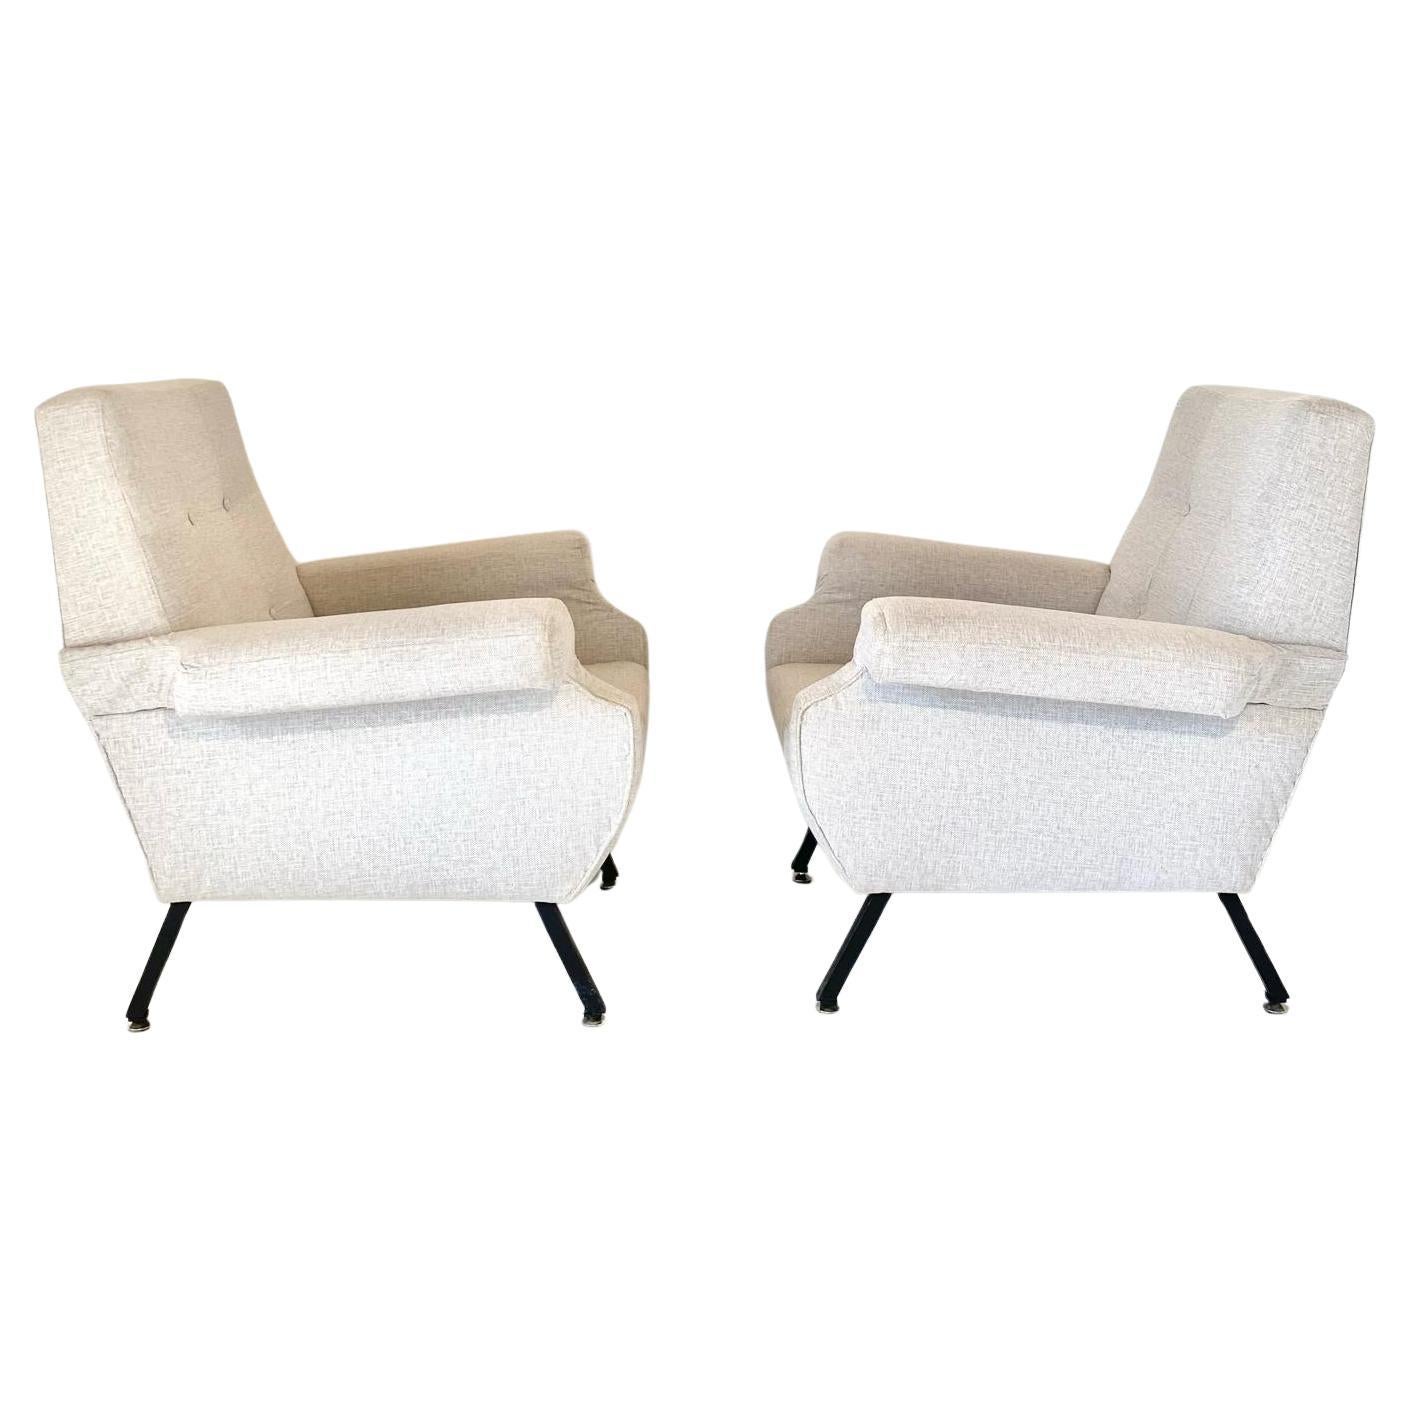 1960s Vintage beige lounge chairs, set of two, Italy 1960s